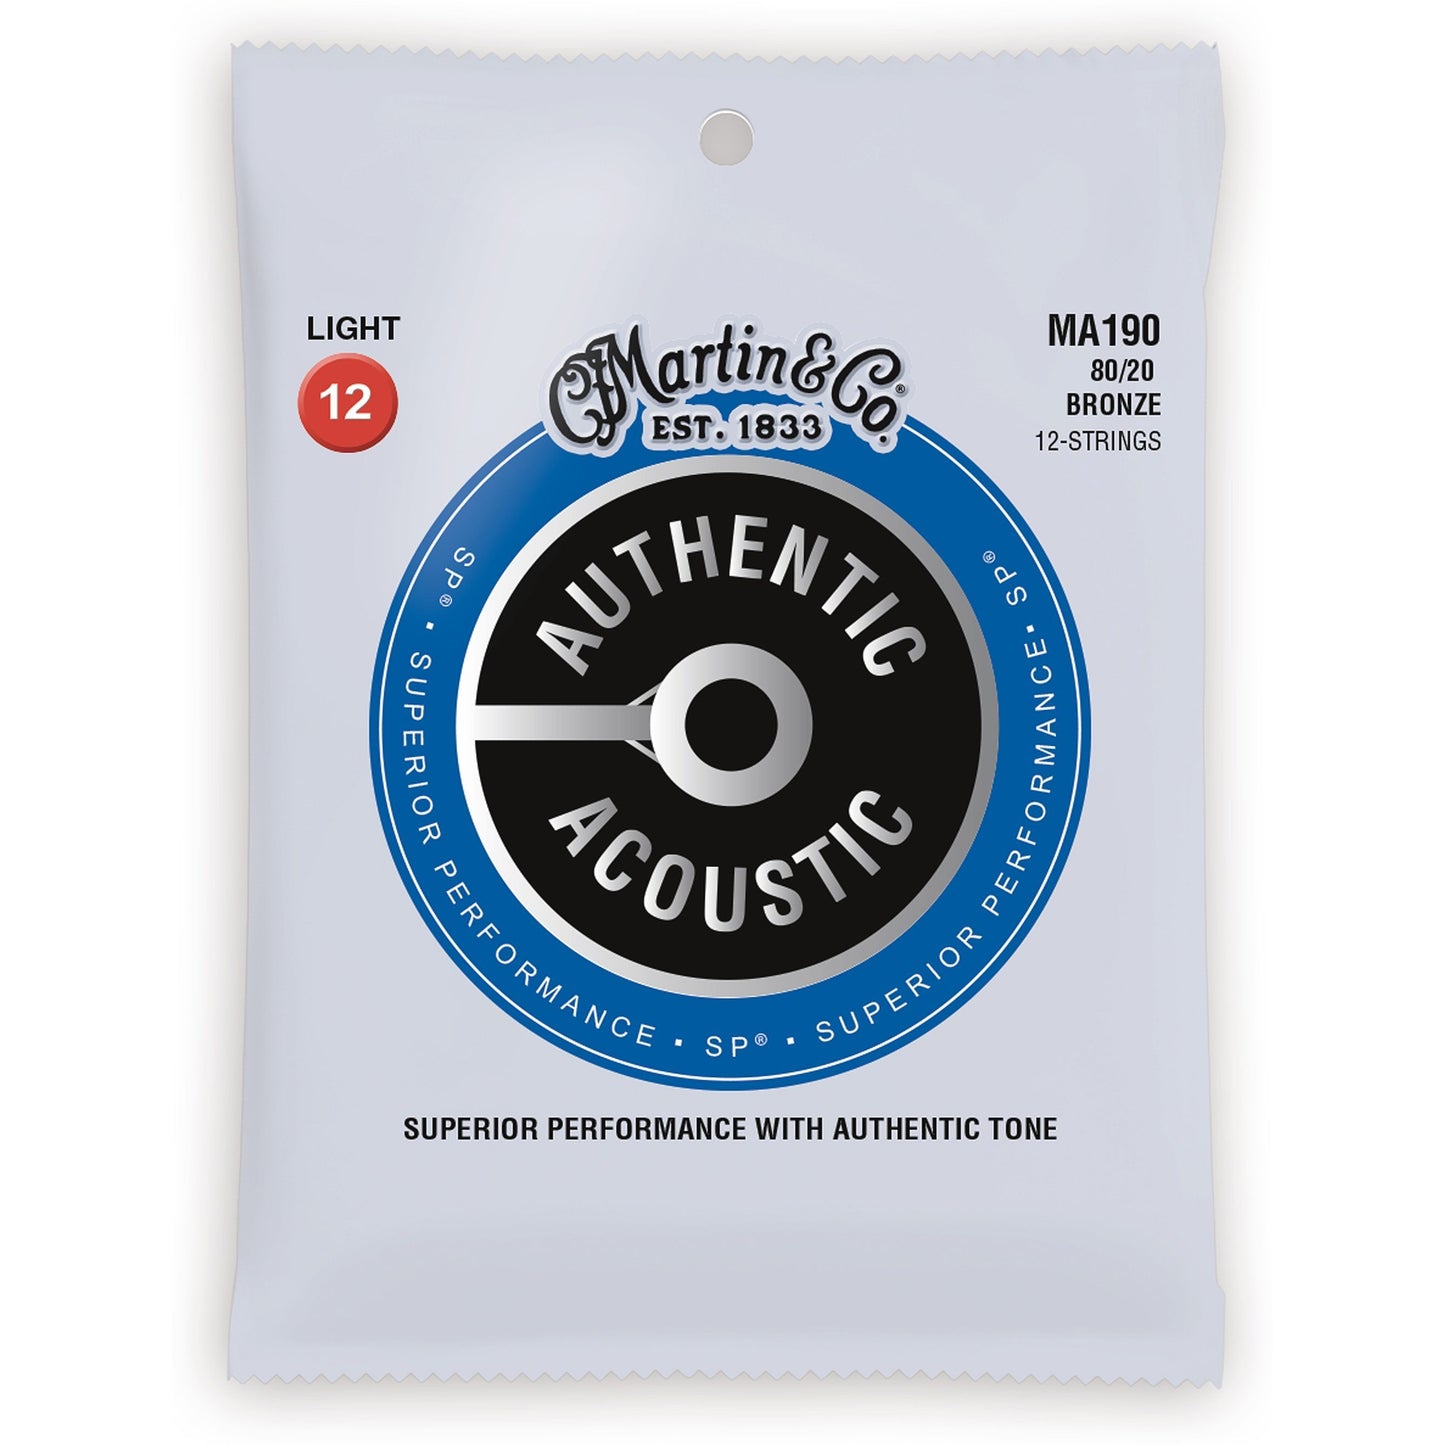 Martin Authentic SP 80/20 Bronze 12-String Acoustic Guitar Strings, MA190, Light